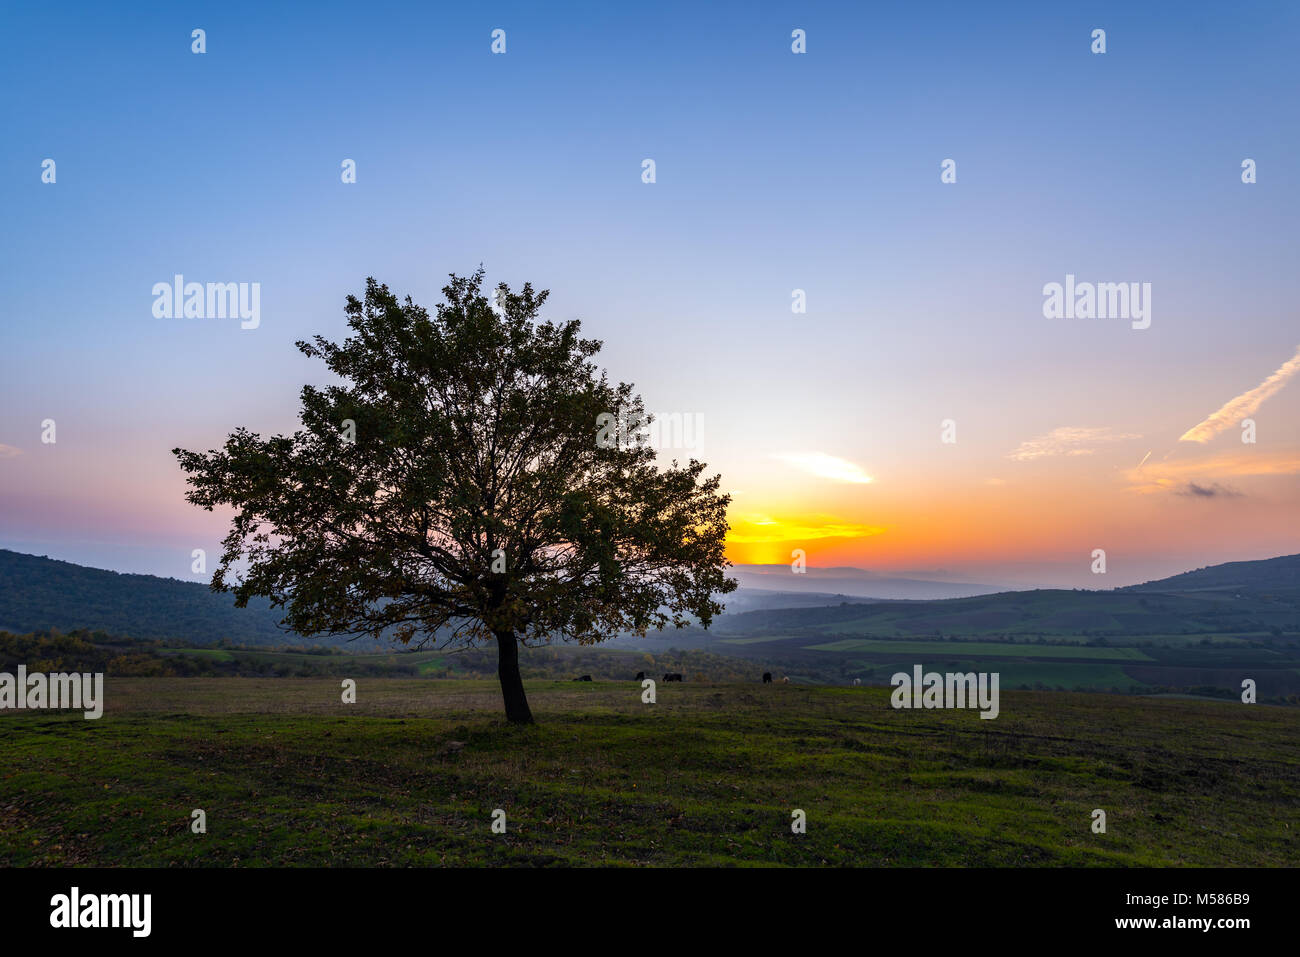 Lonely tree in field at sunset time Stock Photo